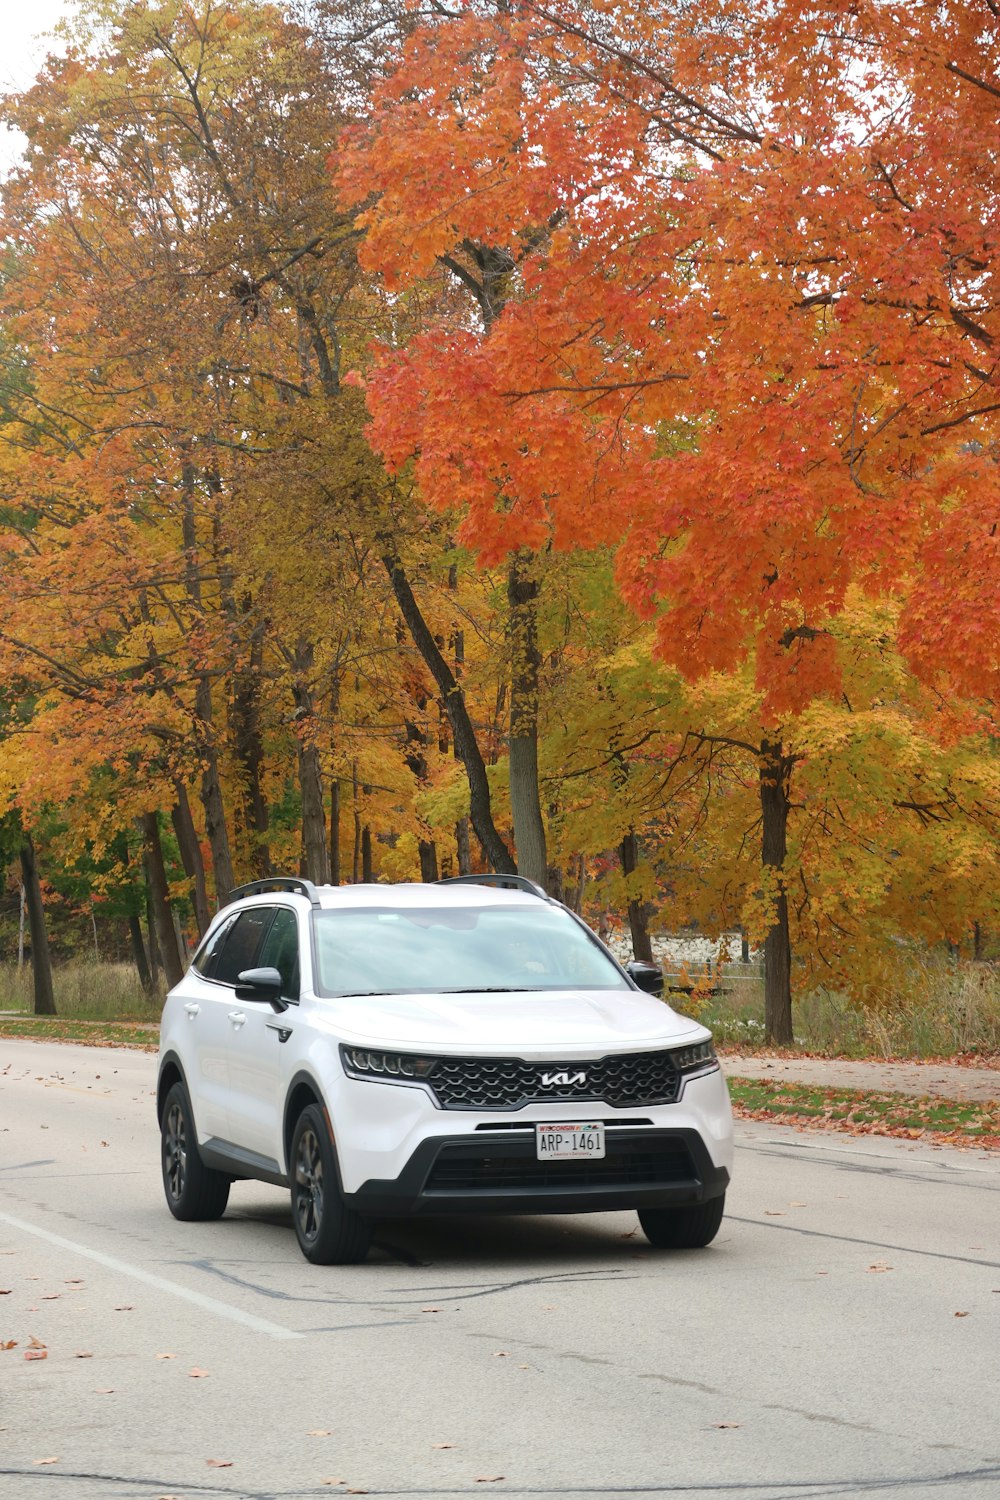 a white car driving down a street next to trees with orange leaves